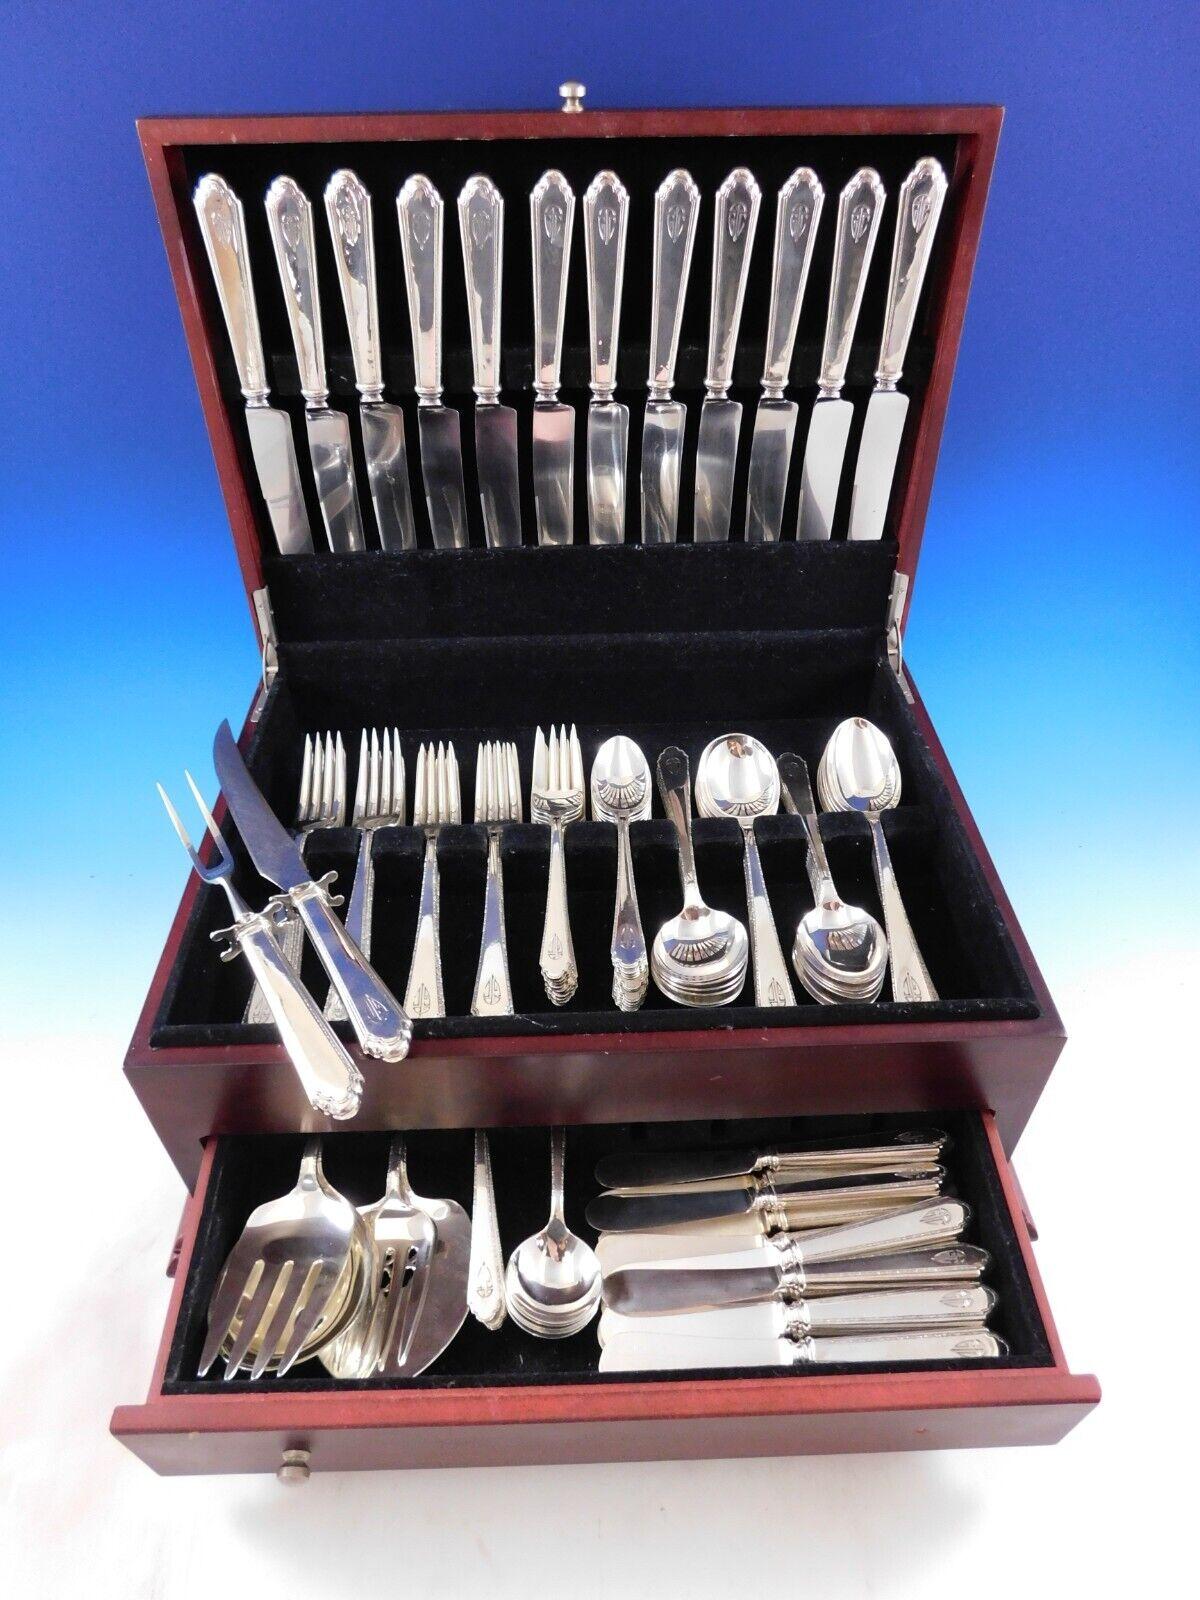 Dinner Size William and Mary by Lunt sterling silver Flatware set, 96 pieces. This set includes:

12 Dinner Size Knives, French, 9 3/4